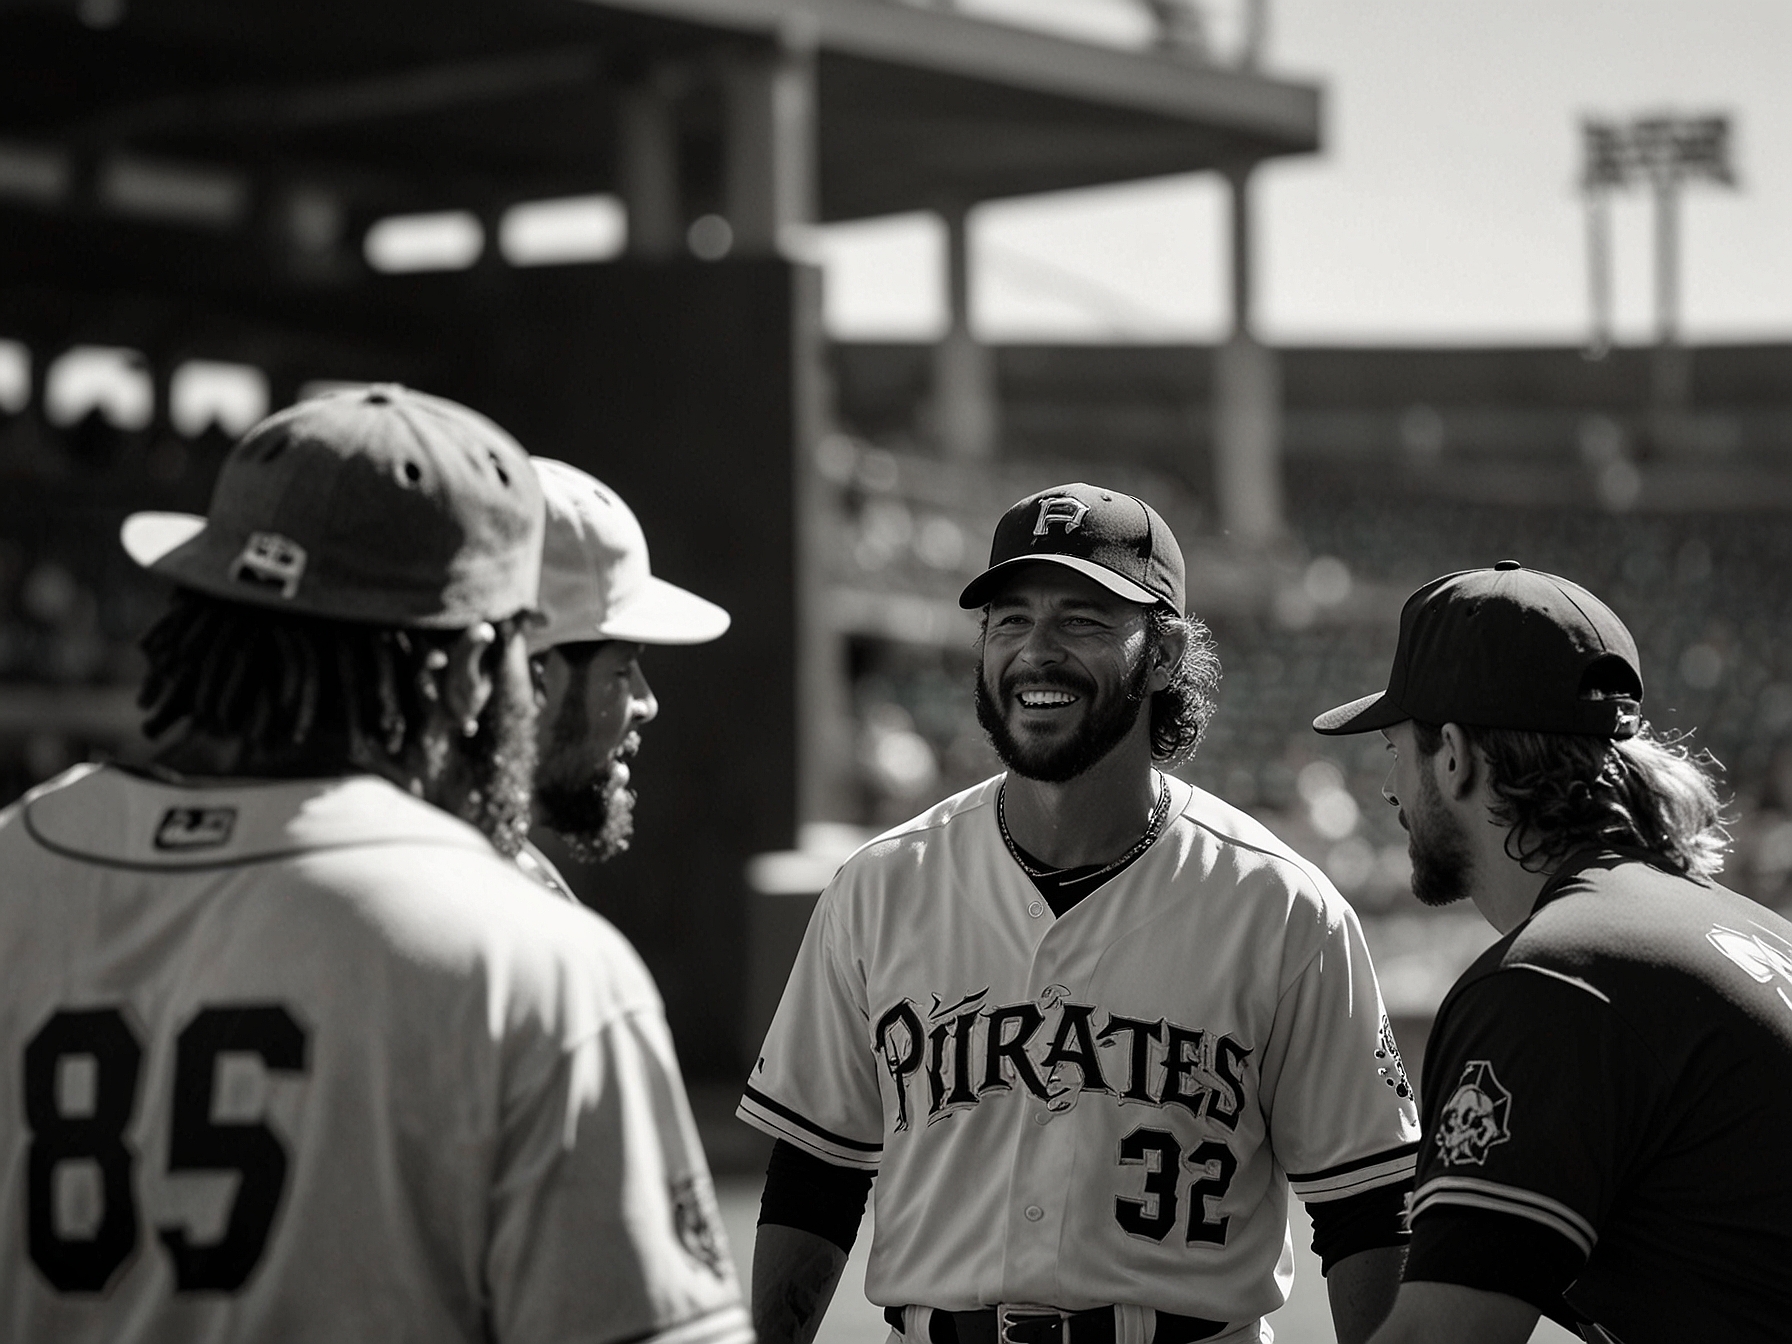 Derek Shelton interacting with the Pirates' players on the field, exemplifying his effective communication and comprehensive management style fostering team cohesion and resilience.